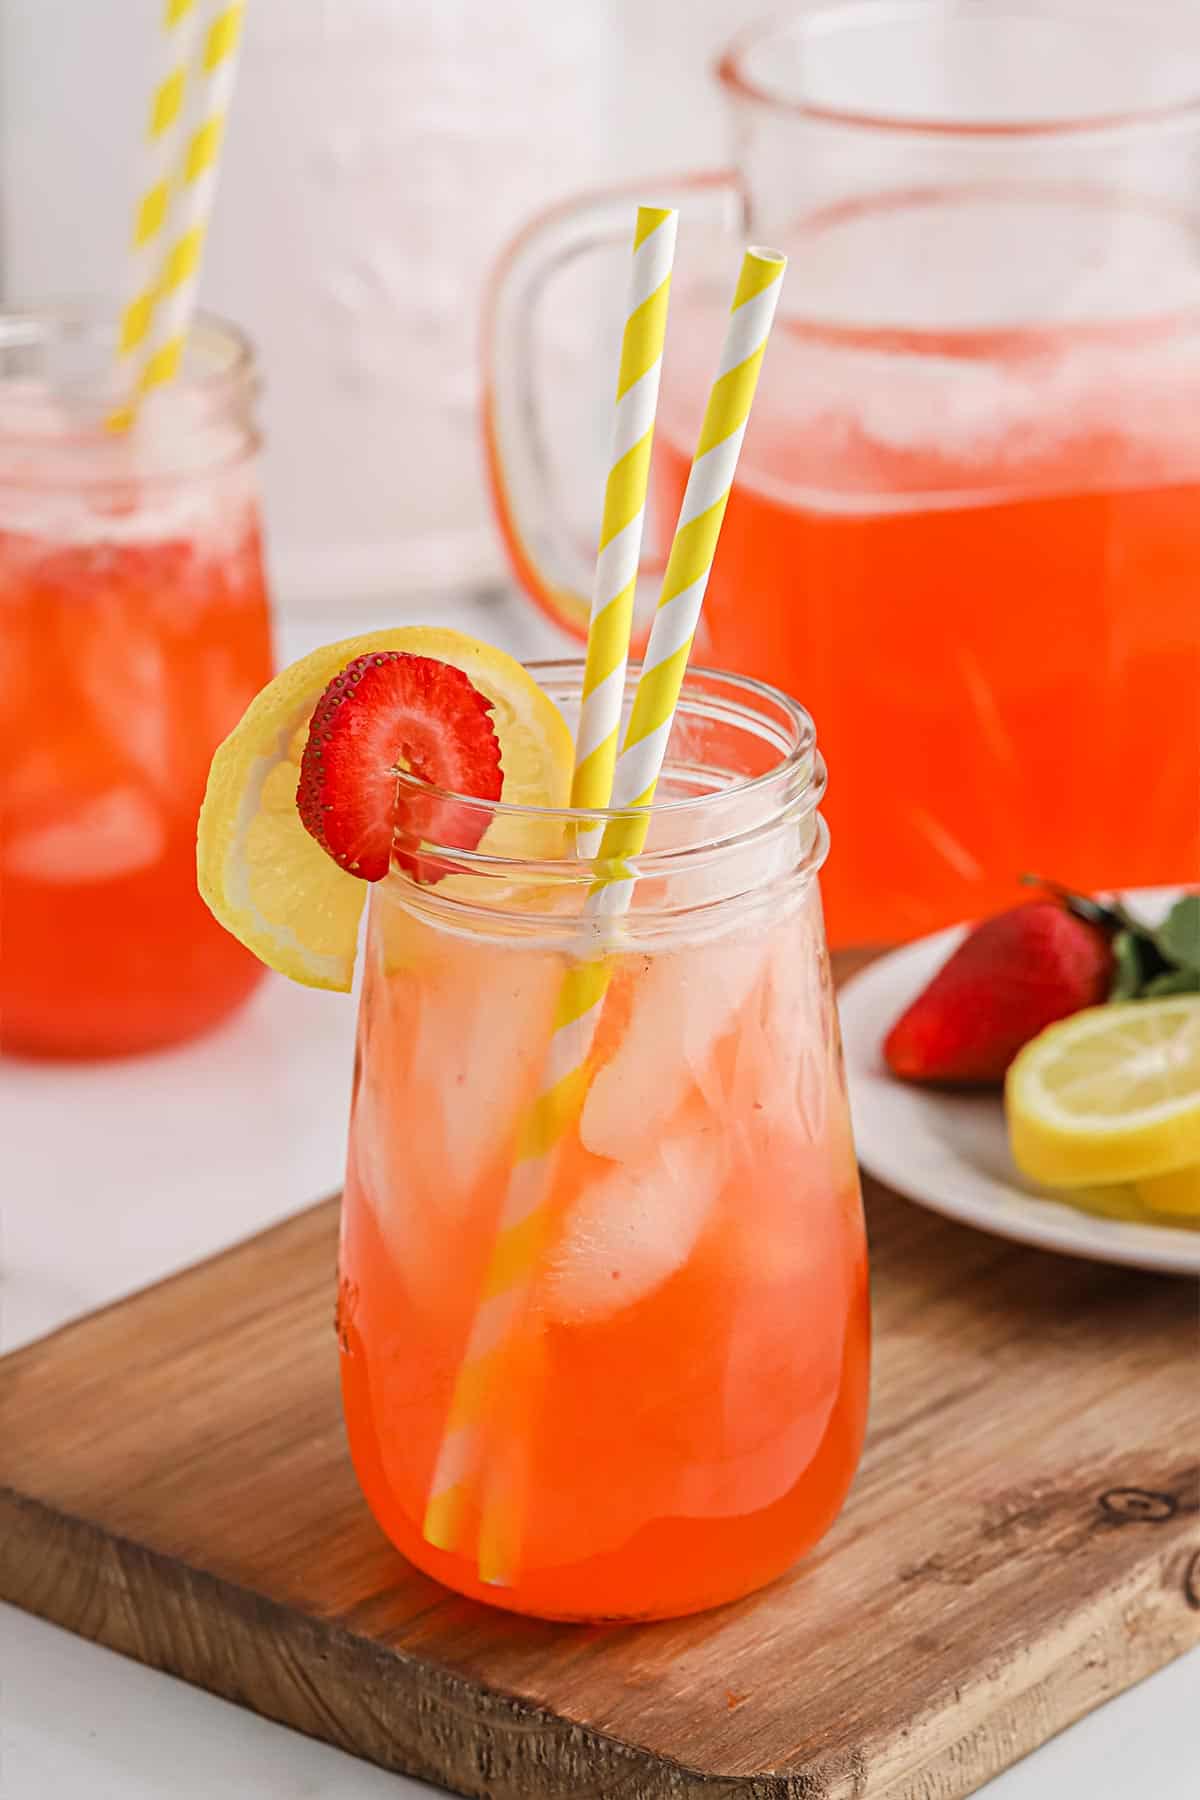 A glass of strawberry lemonade poured up with the pitcher behind and garnished with lemon slice and strawberry.